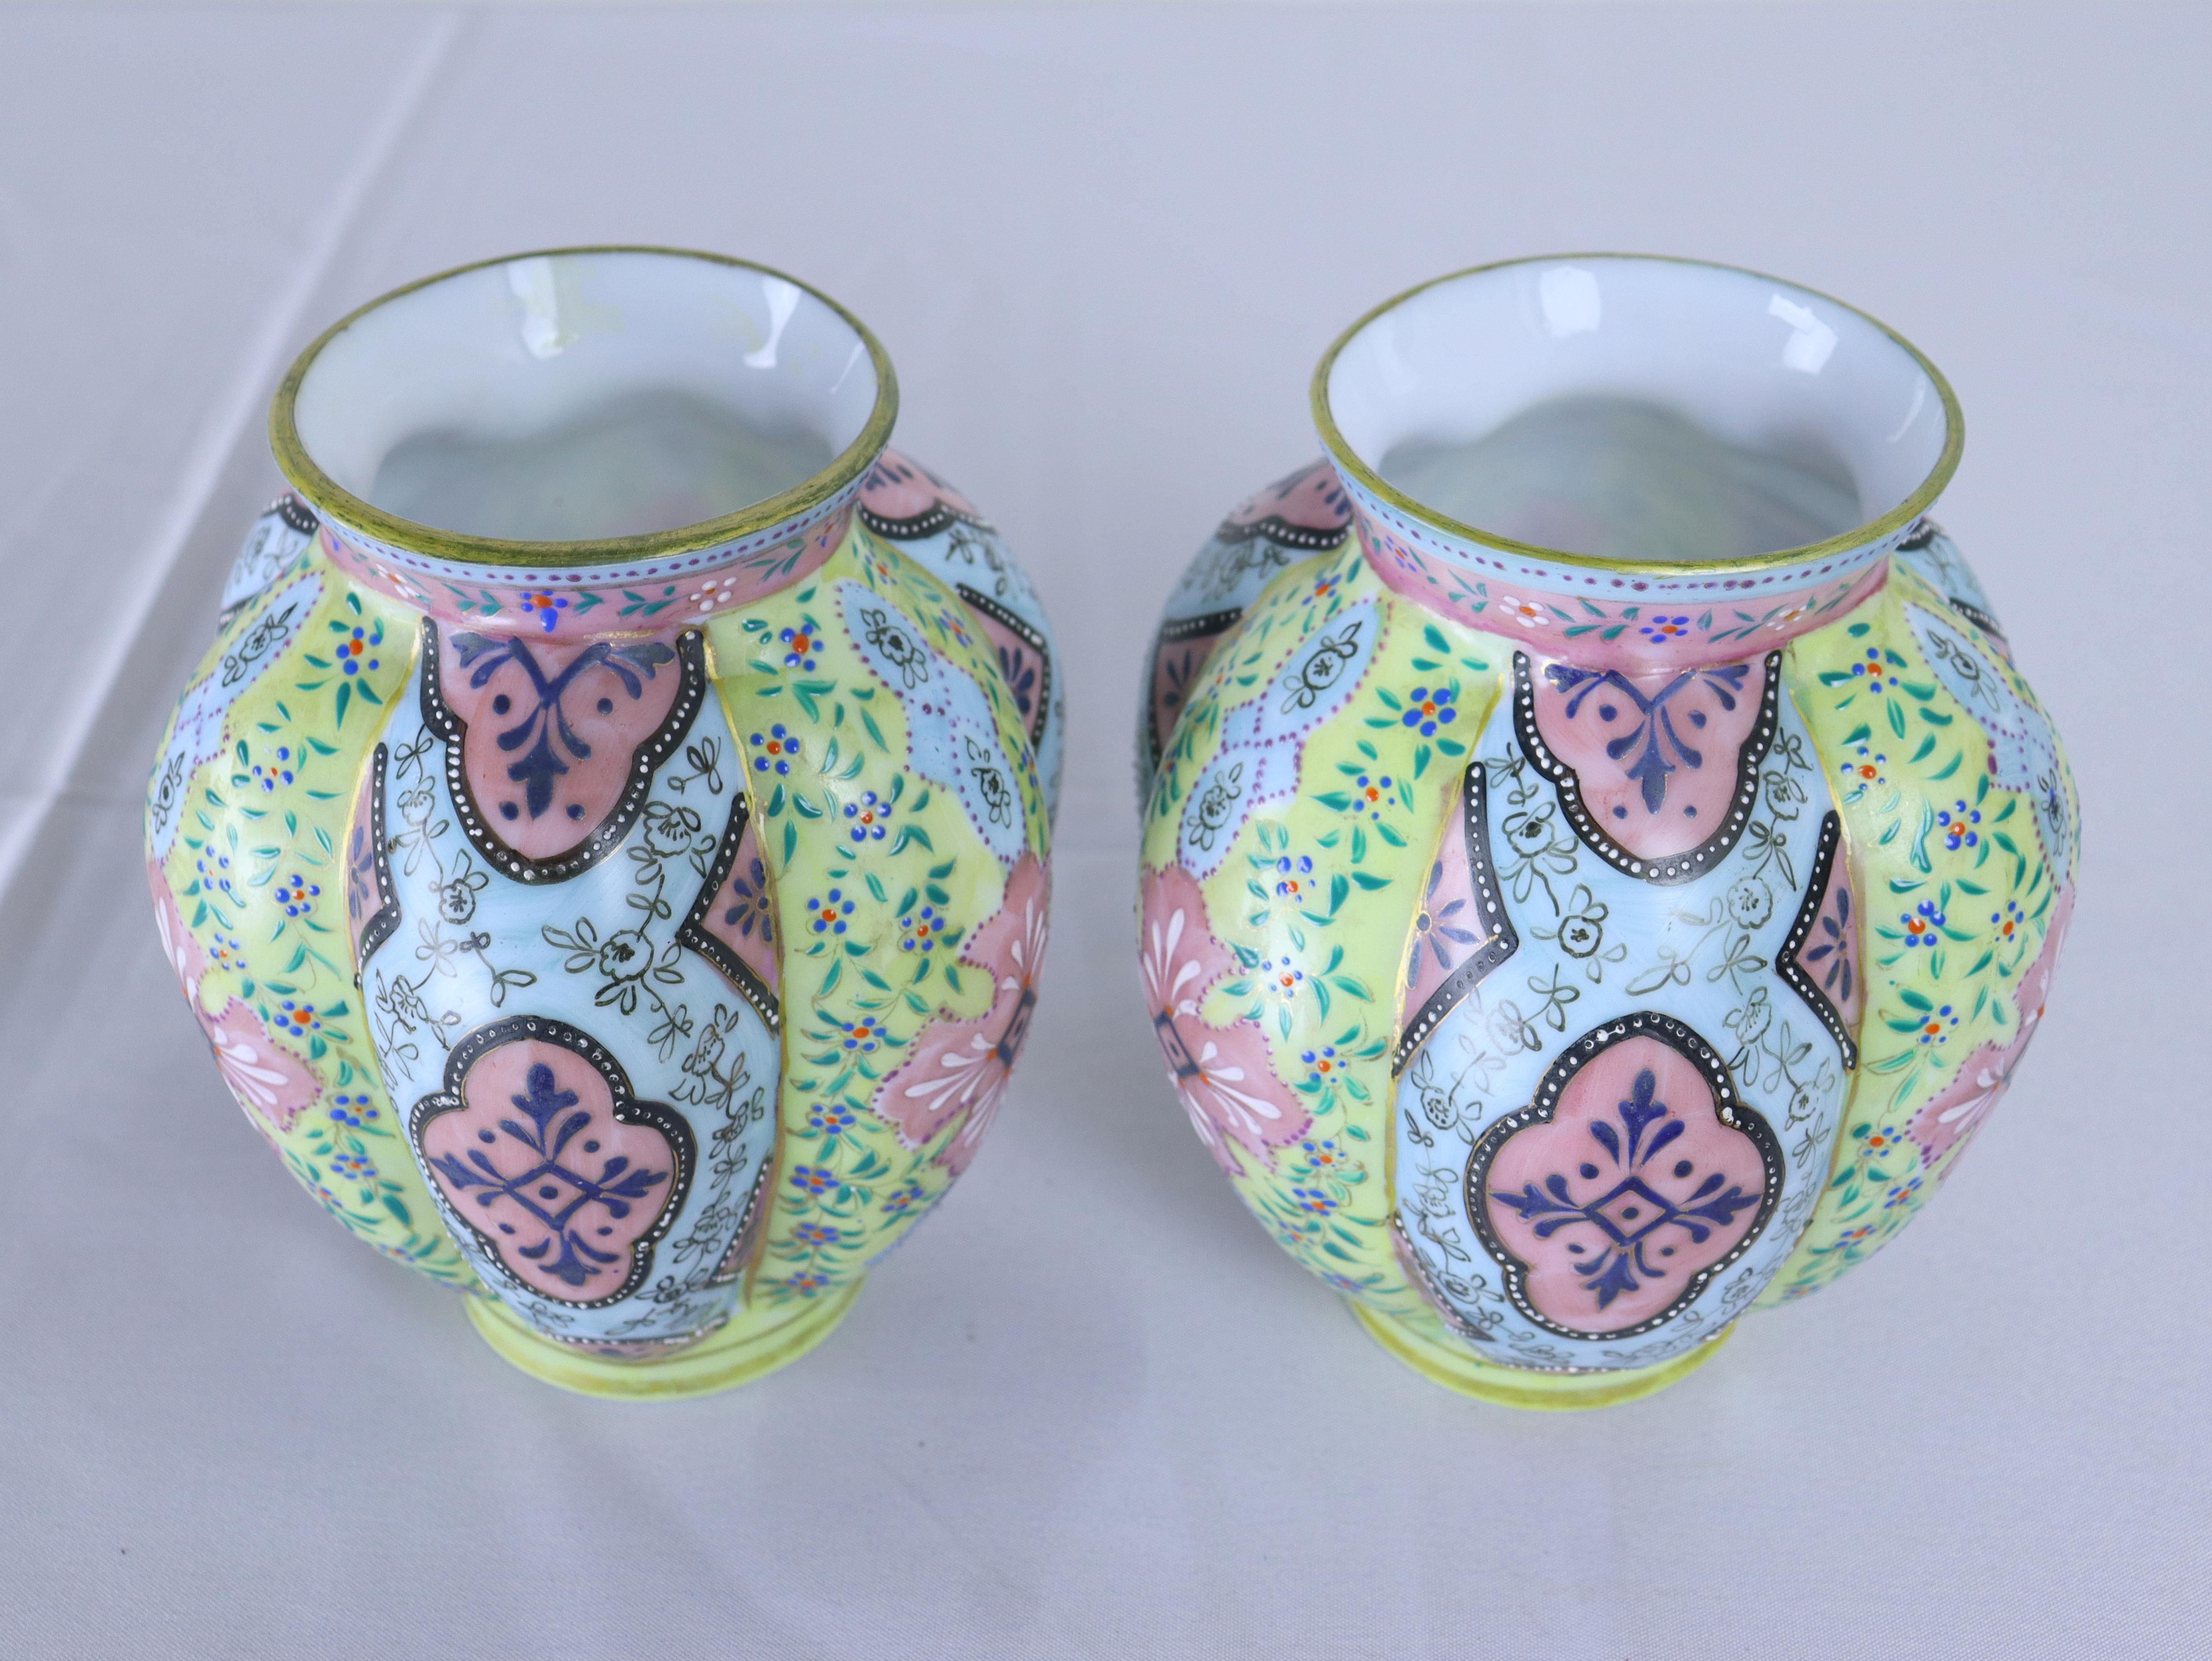 A rare pair of 19th Century enameled opaline glass vases by Thomas Webb in the Morrocan motif.  Beautiful pastel colors, typical of his work.  In good antique condition, no chips.